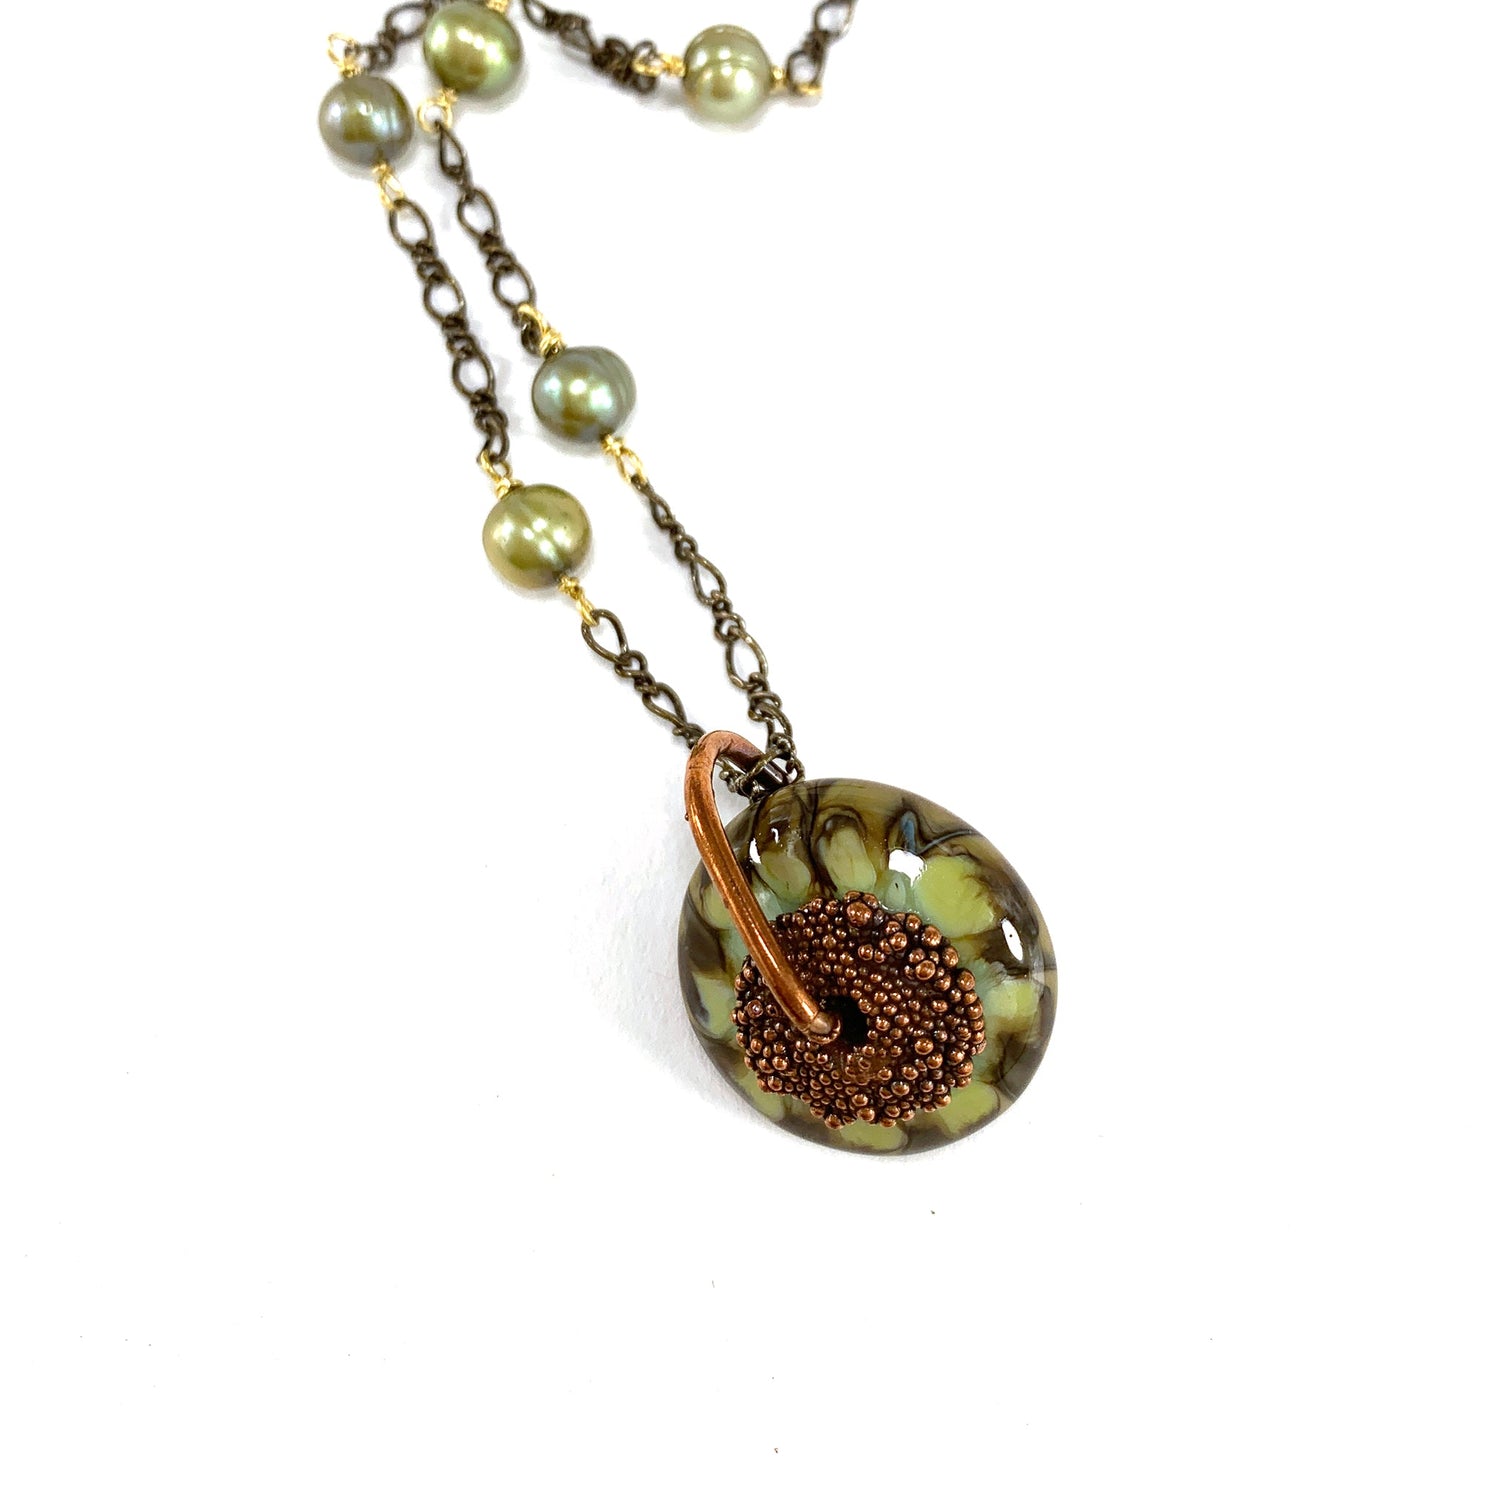 Earthy Disc Bead necklace - The Glass Acorn